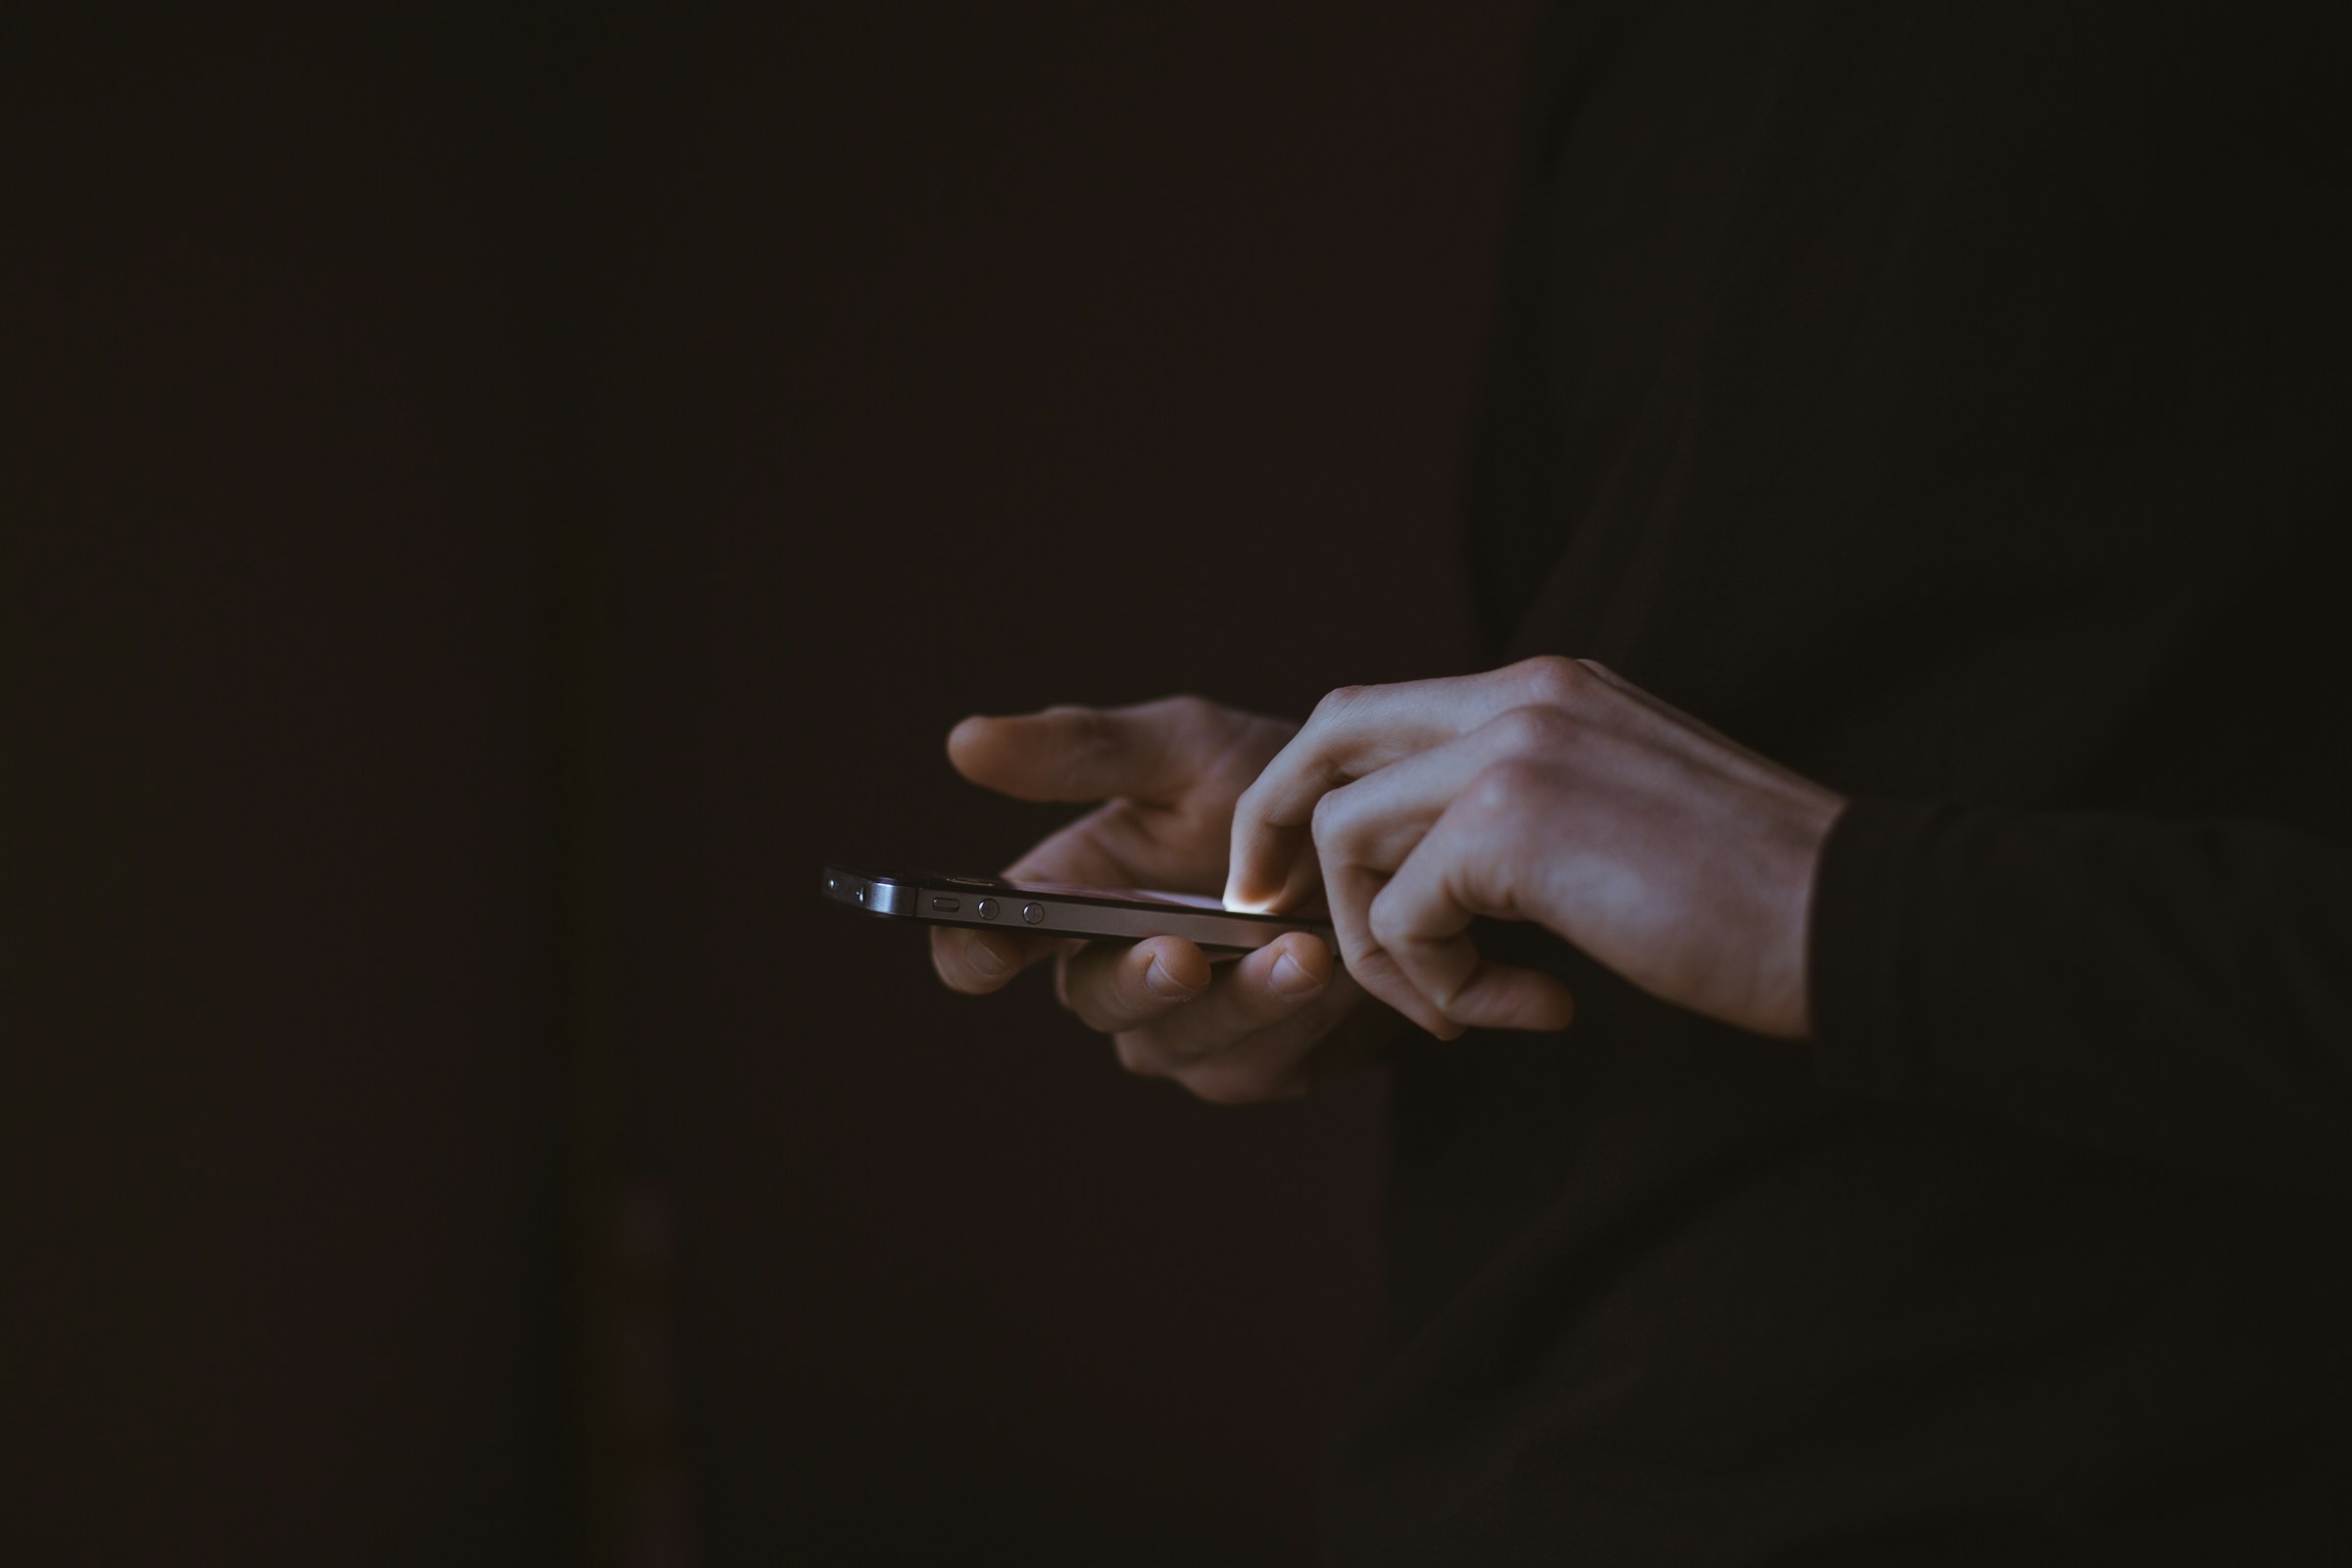 A person holding a phone | Source: Unsplash